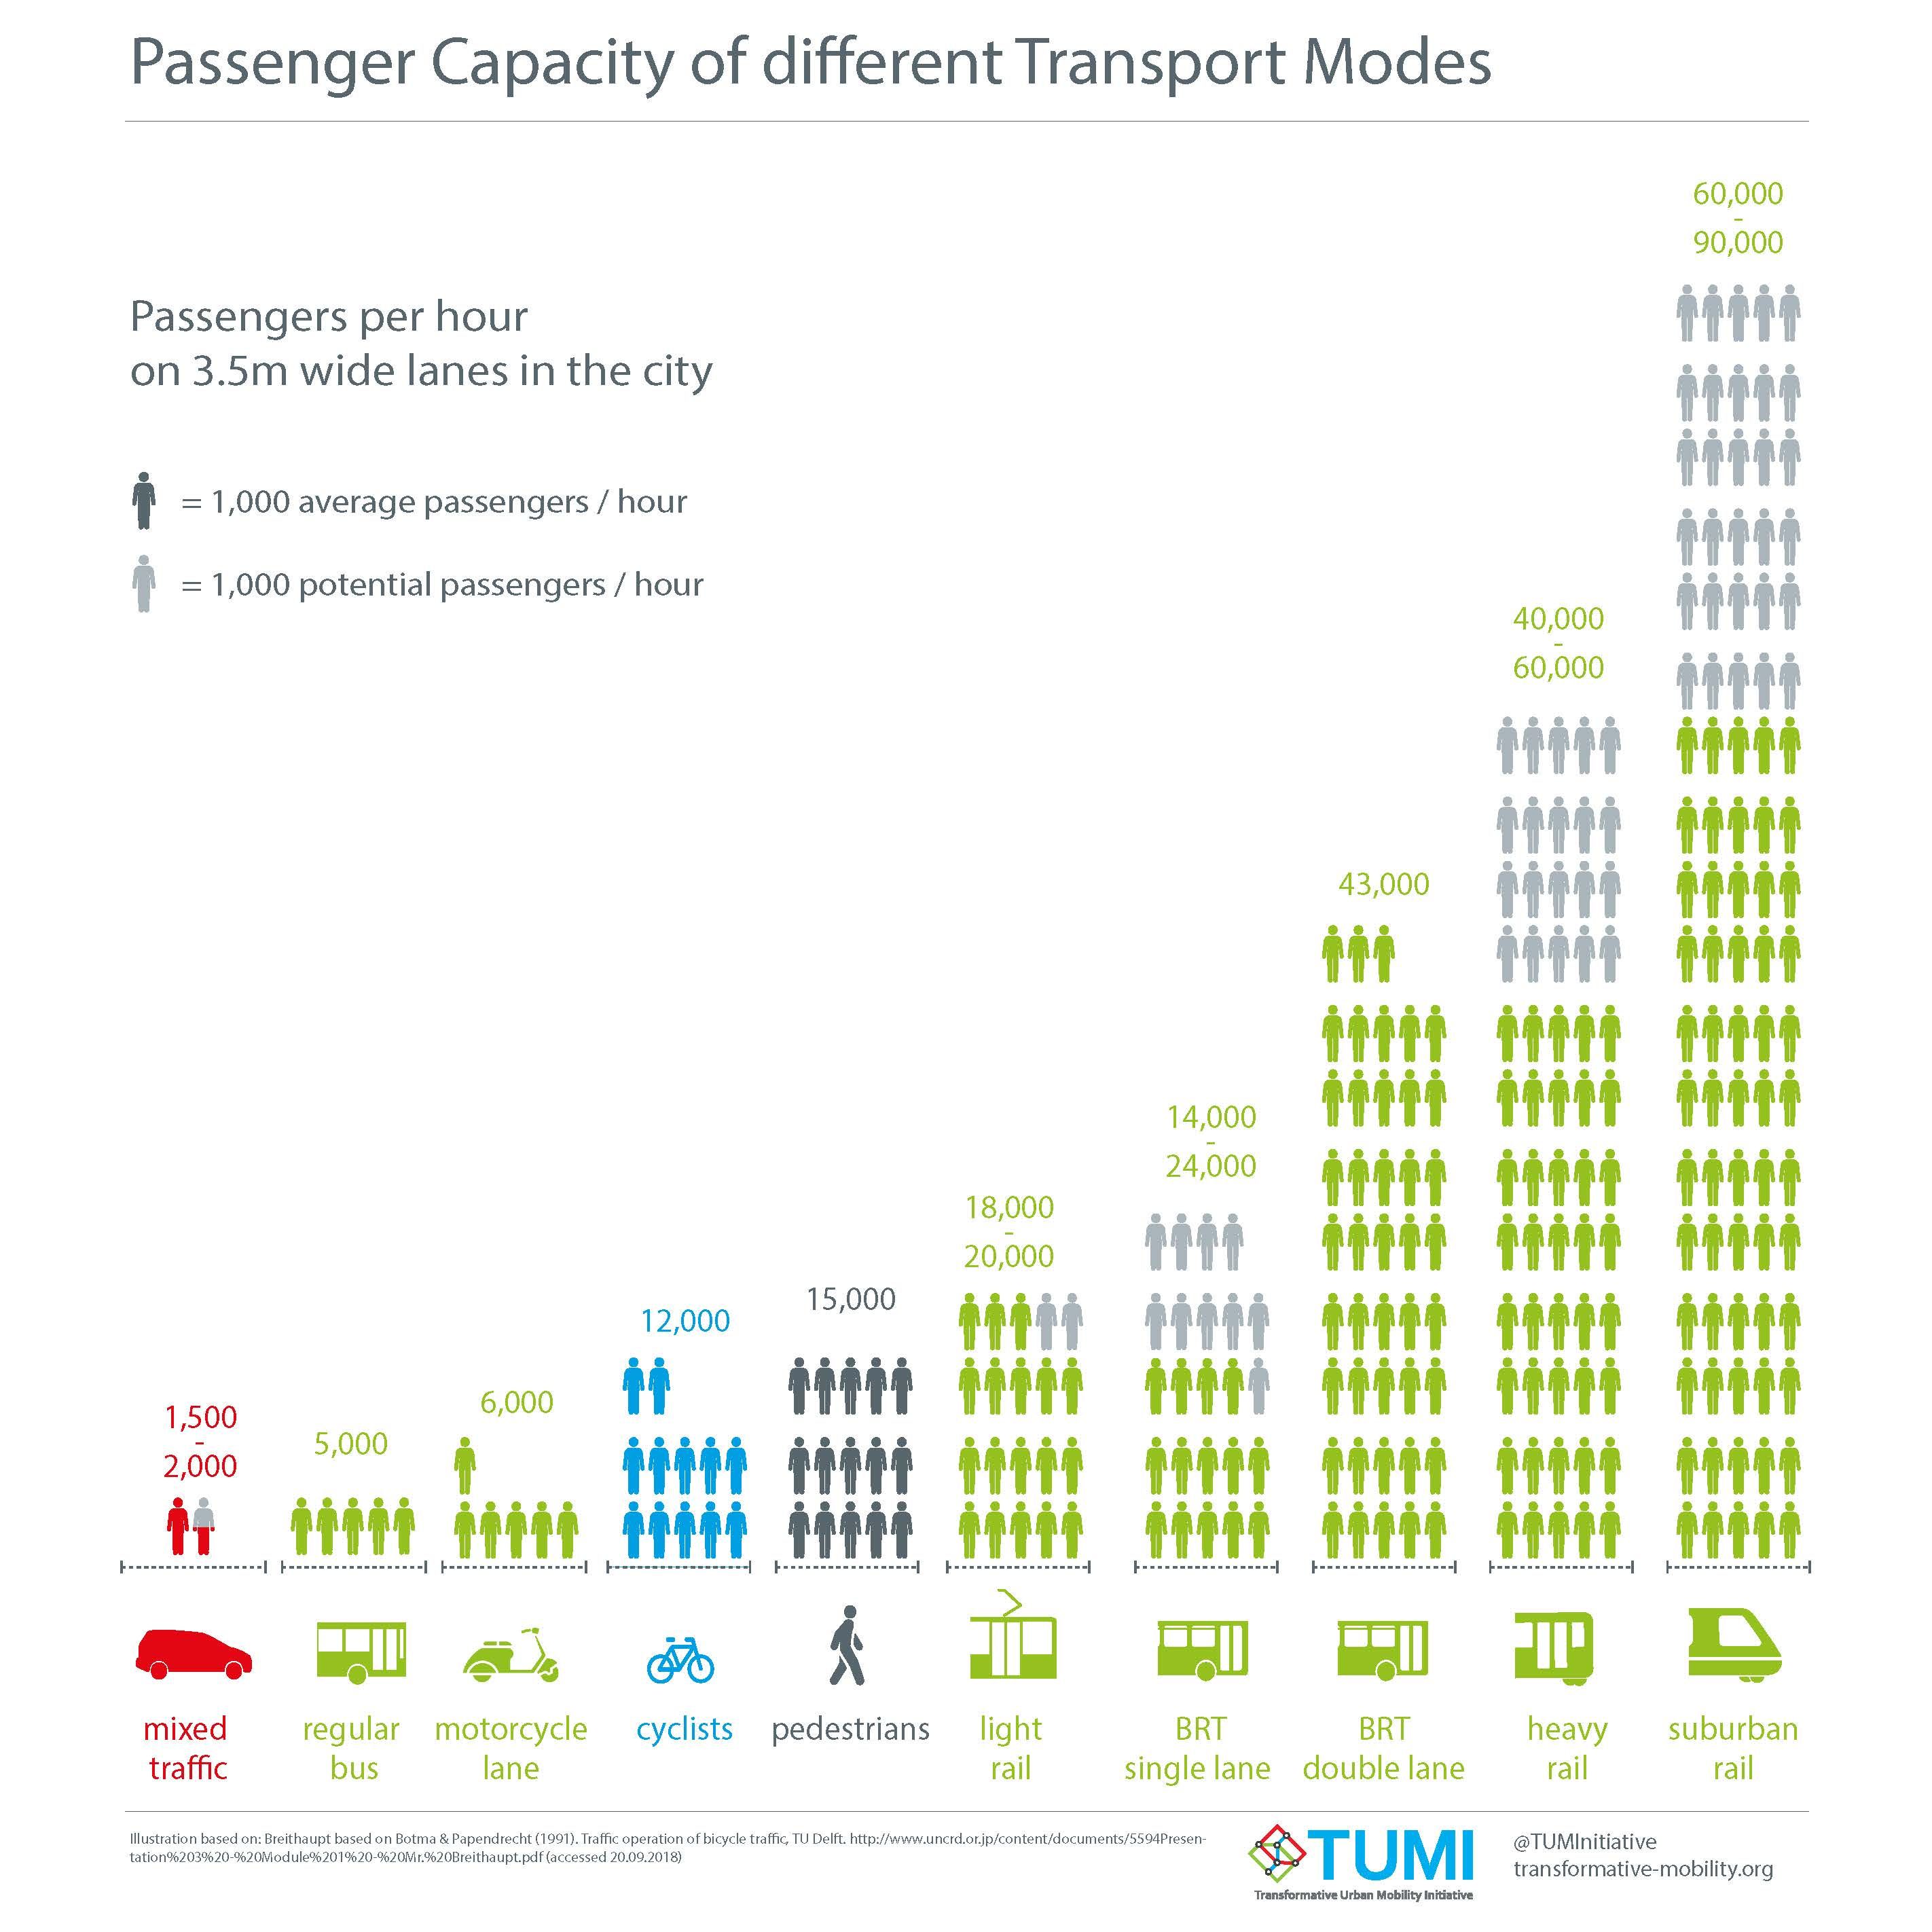 Passenger Capacity of different Transport Modes